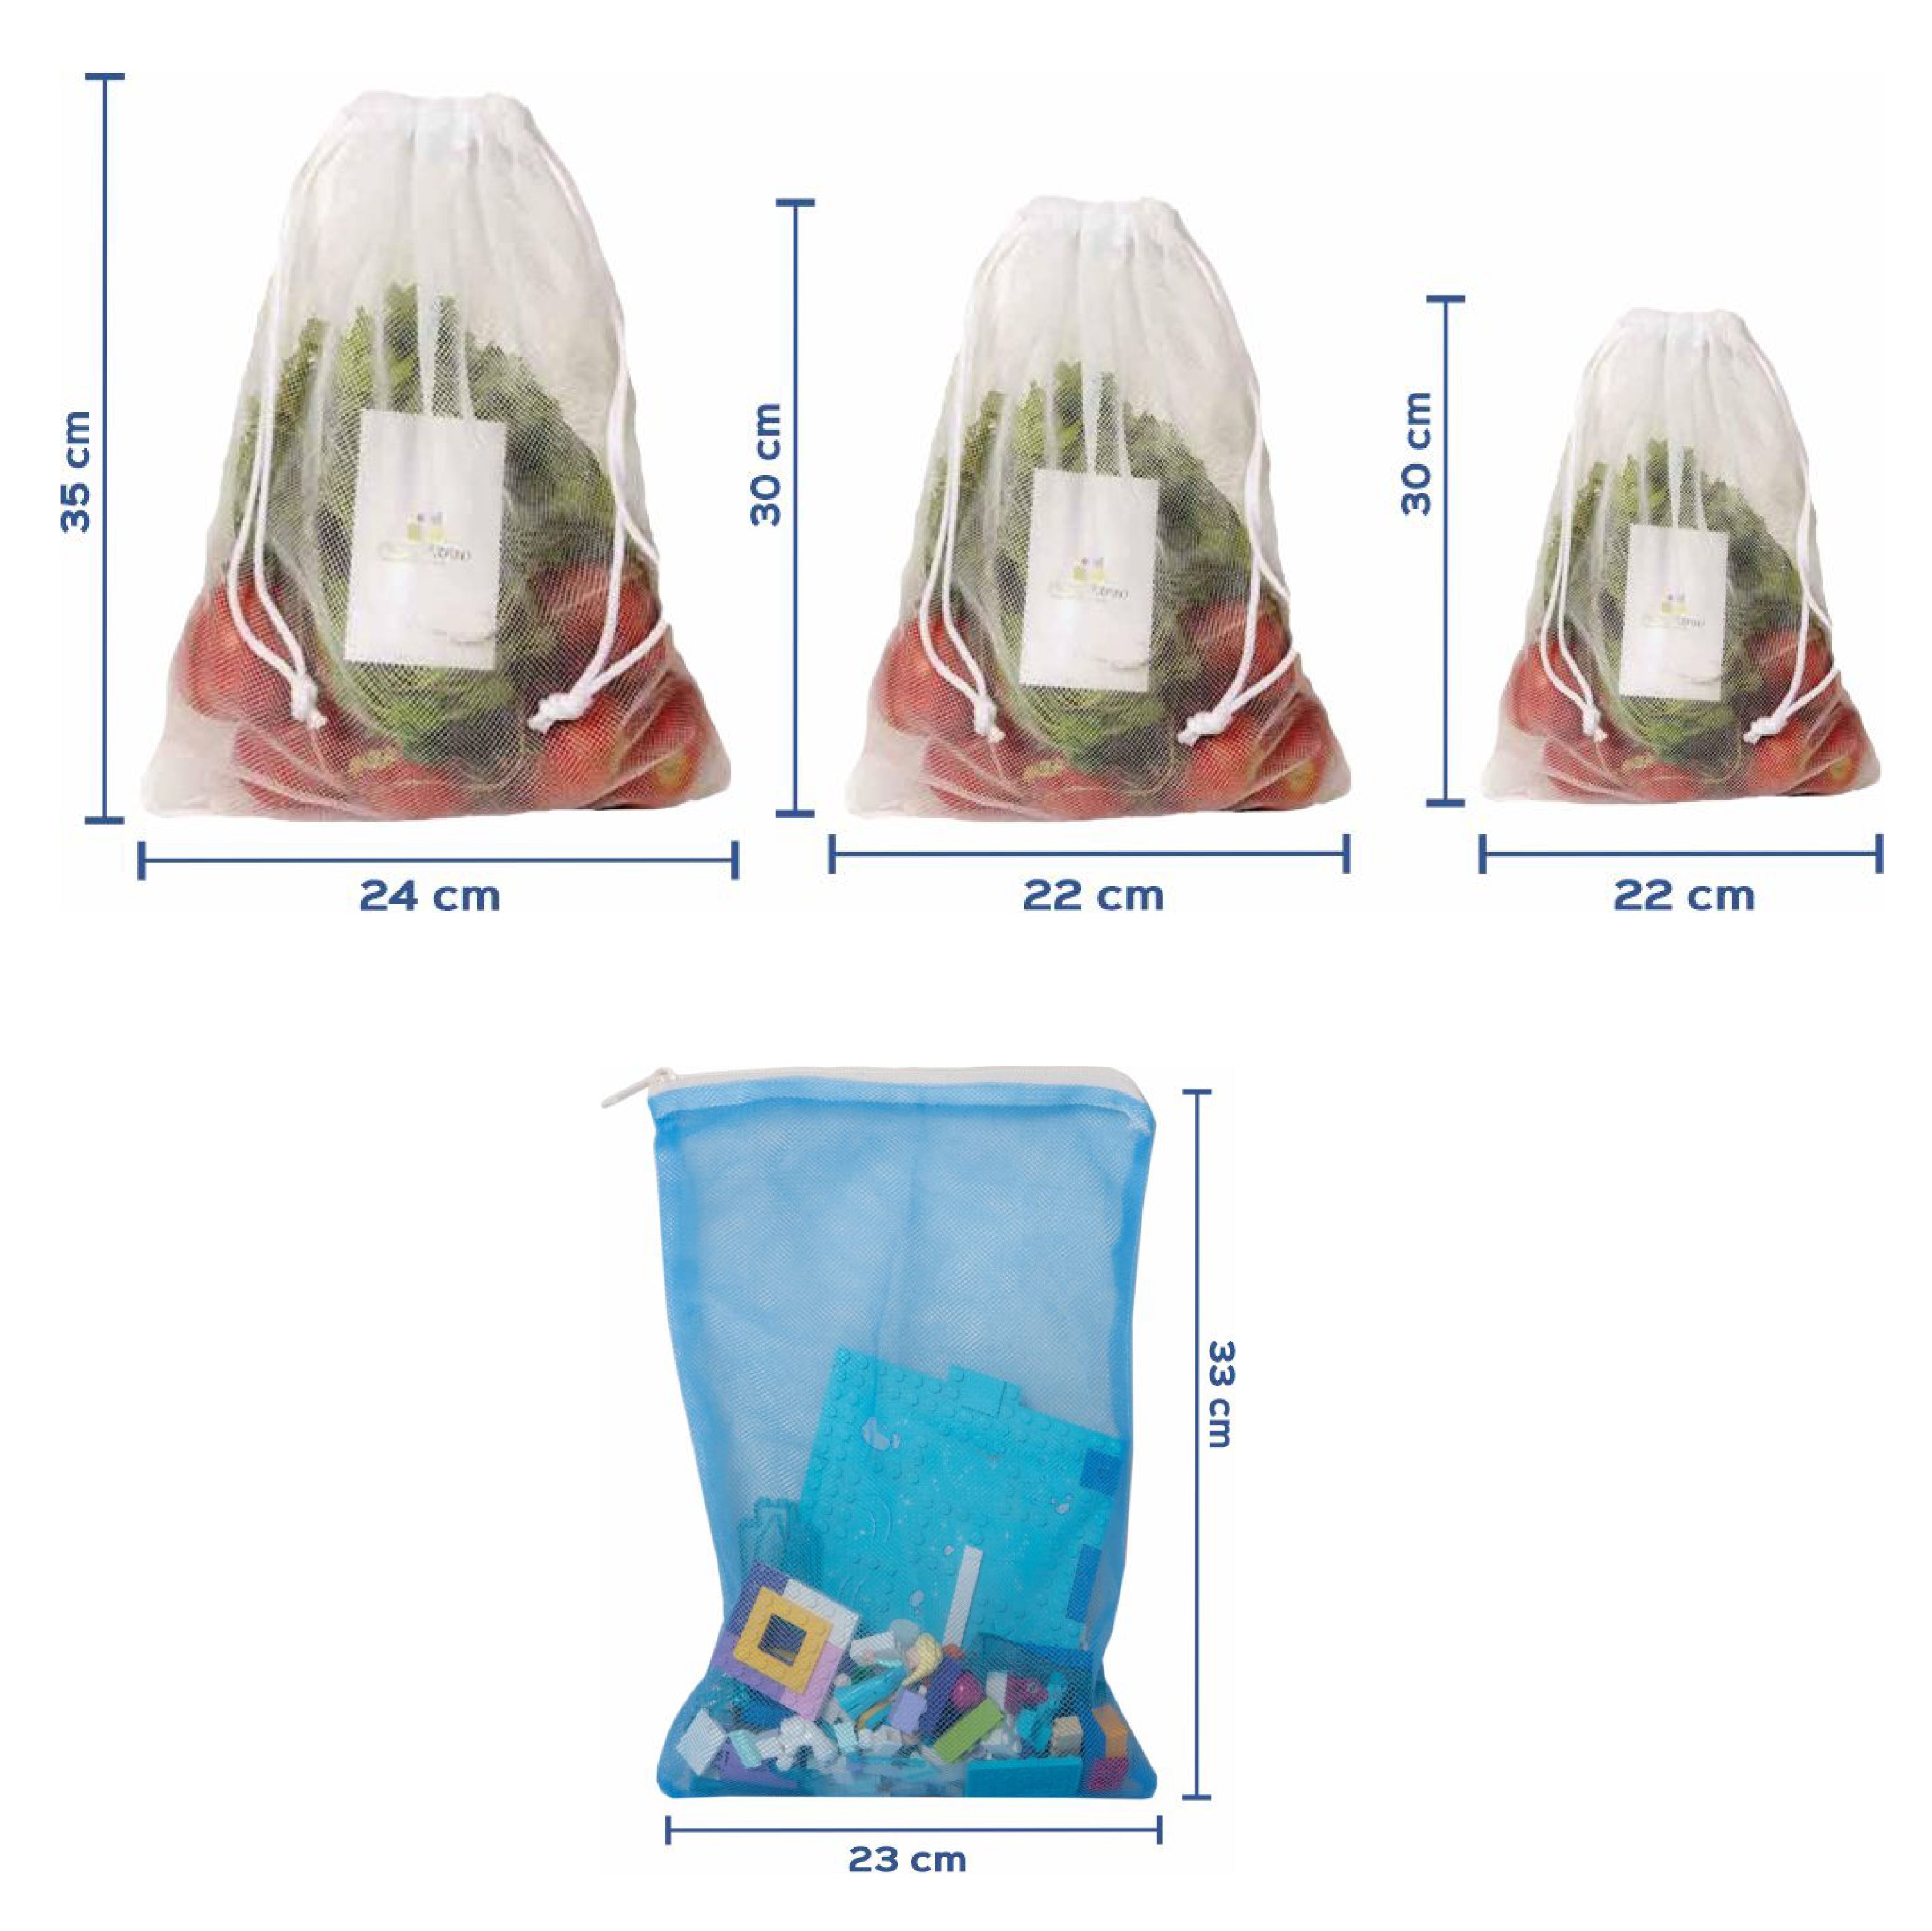 Combo of 12 Reusable Fridge Vegetable bags with Drawstrings and 12 Multicolor Vegetable Pouches with Zipper